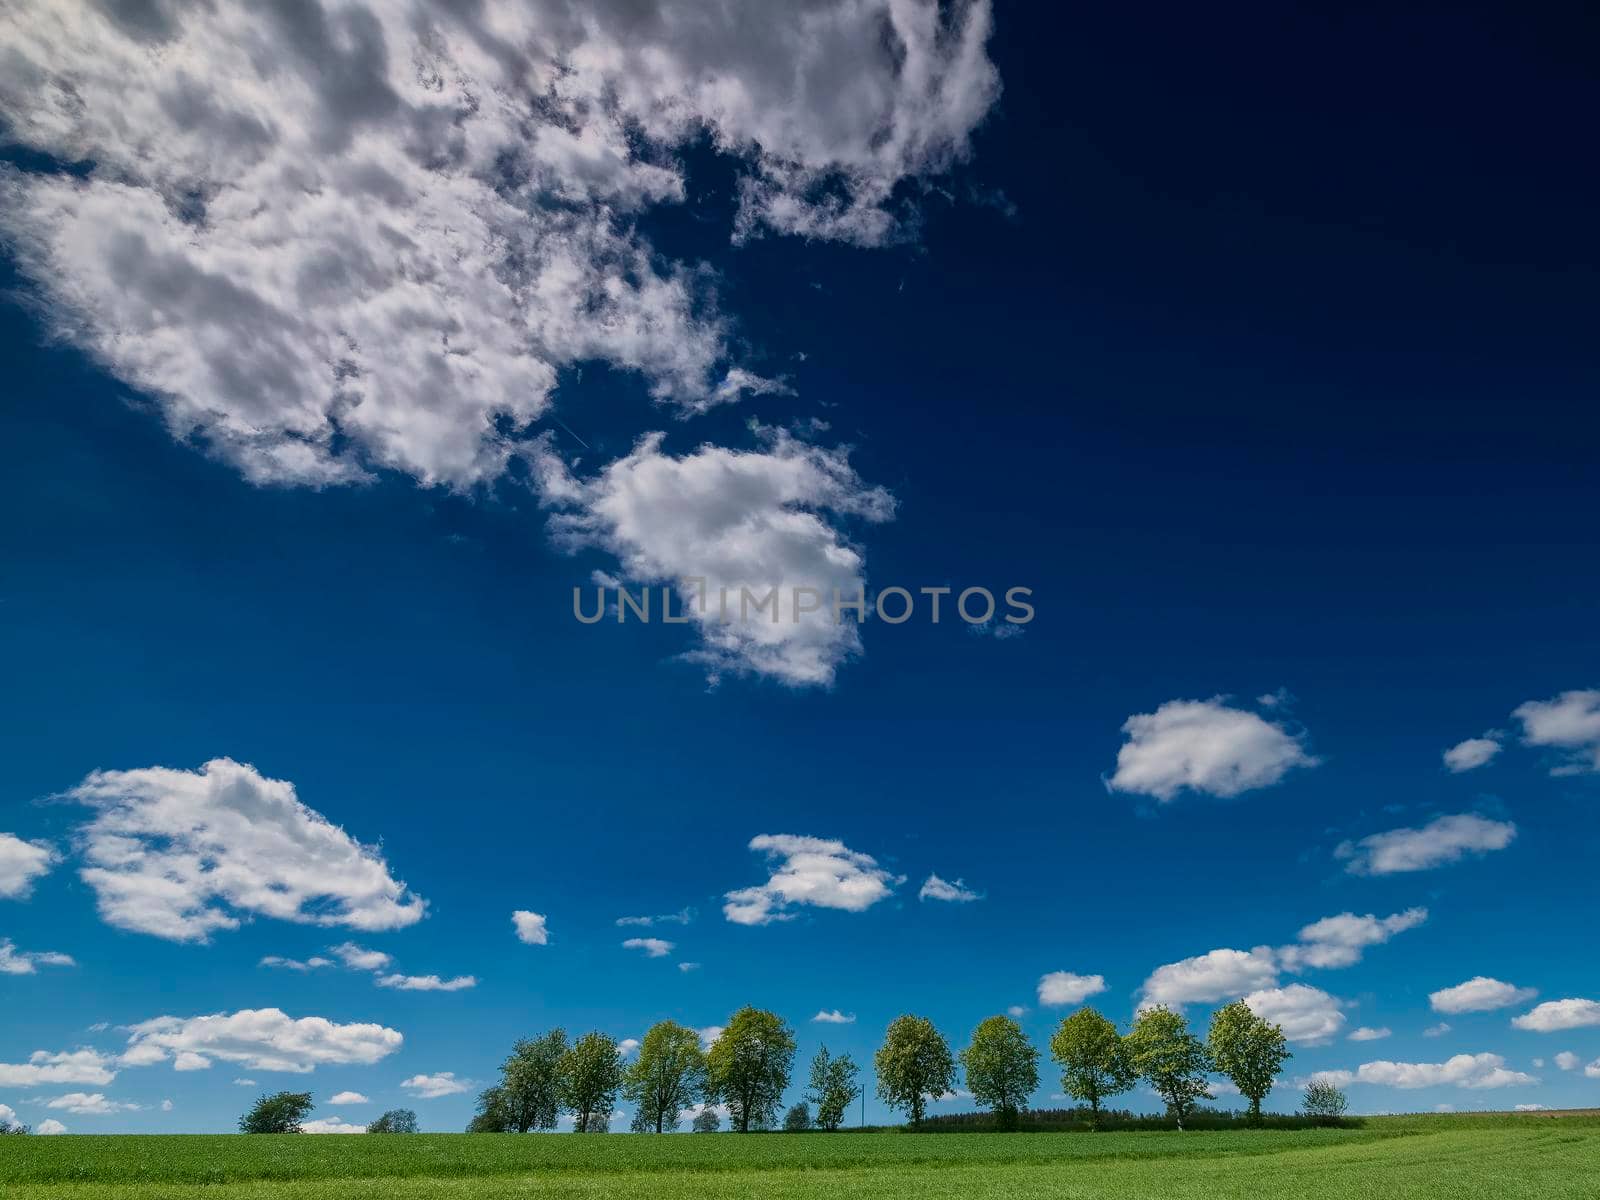 Row of trees in the field with view towards the clouds, trees in the field with clear clouds and blue sky, TREES IN THE FIELD WITH VIEW TO HEAVEN